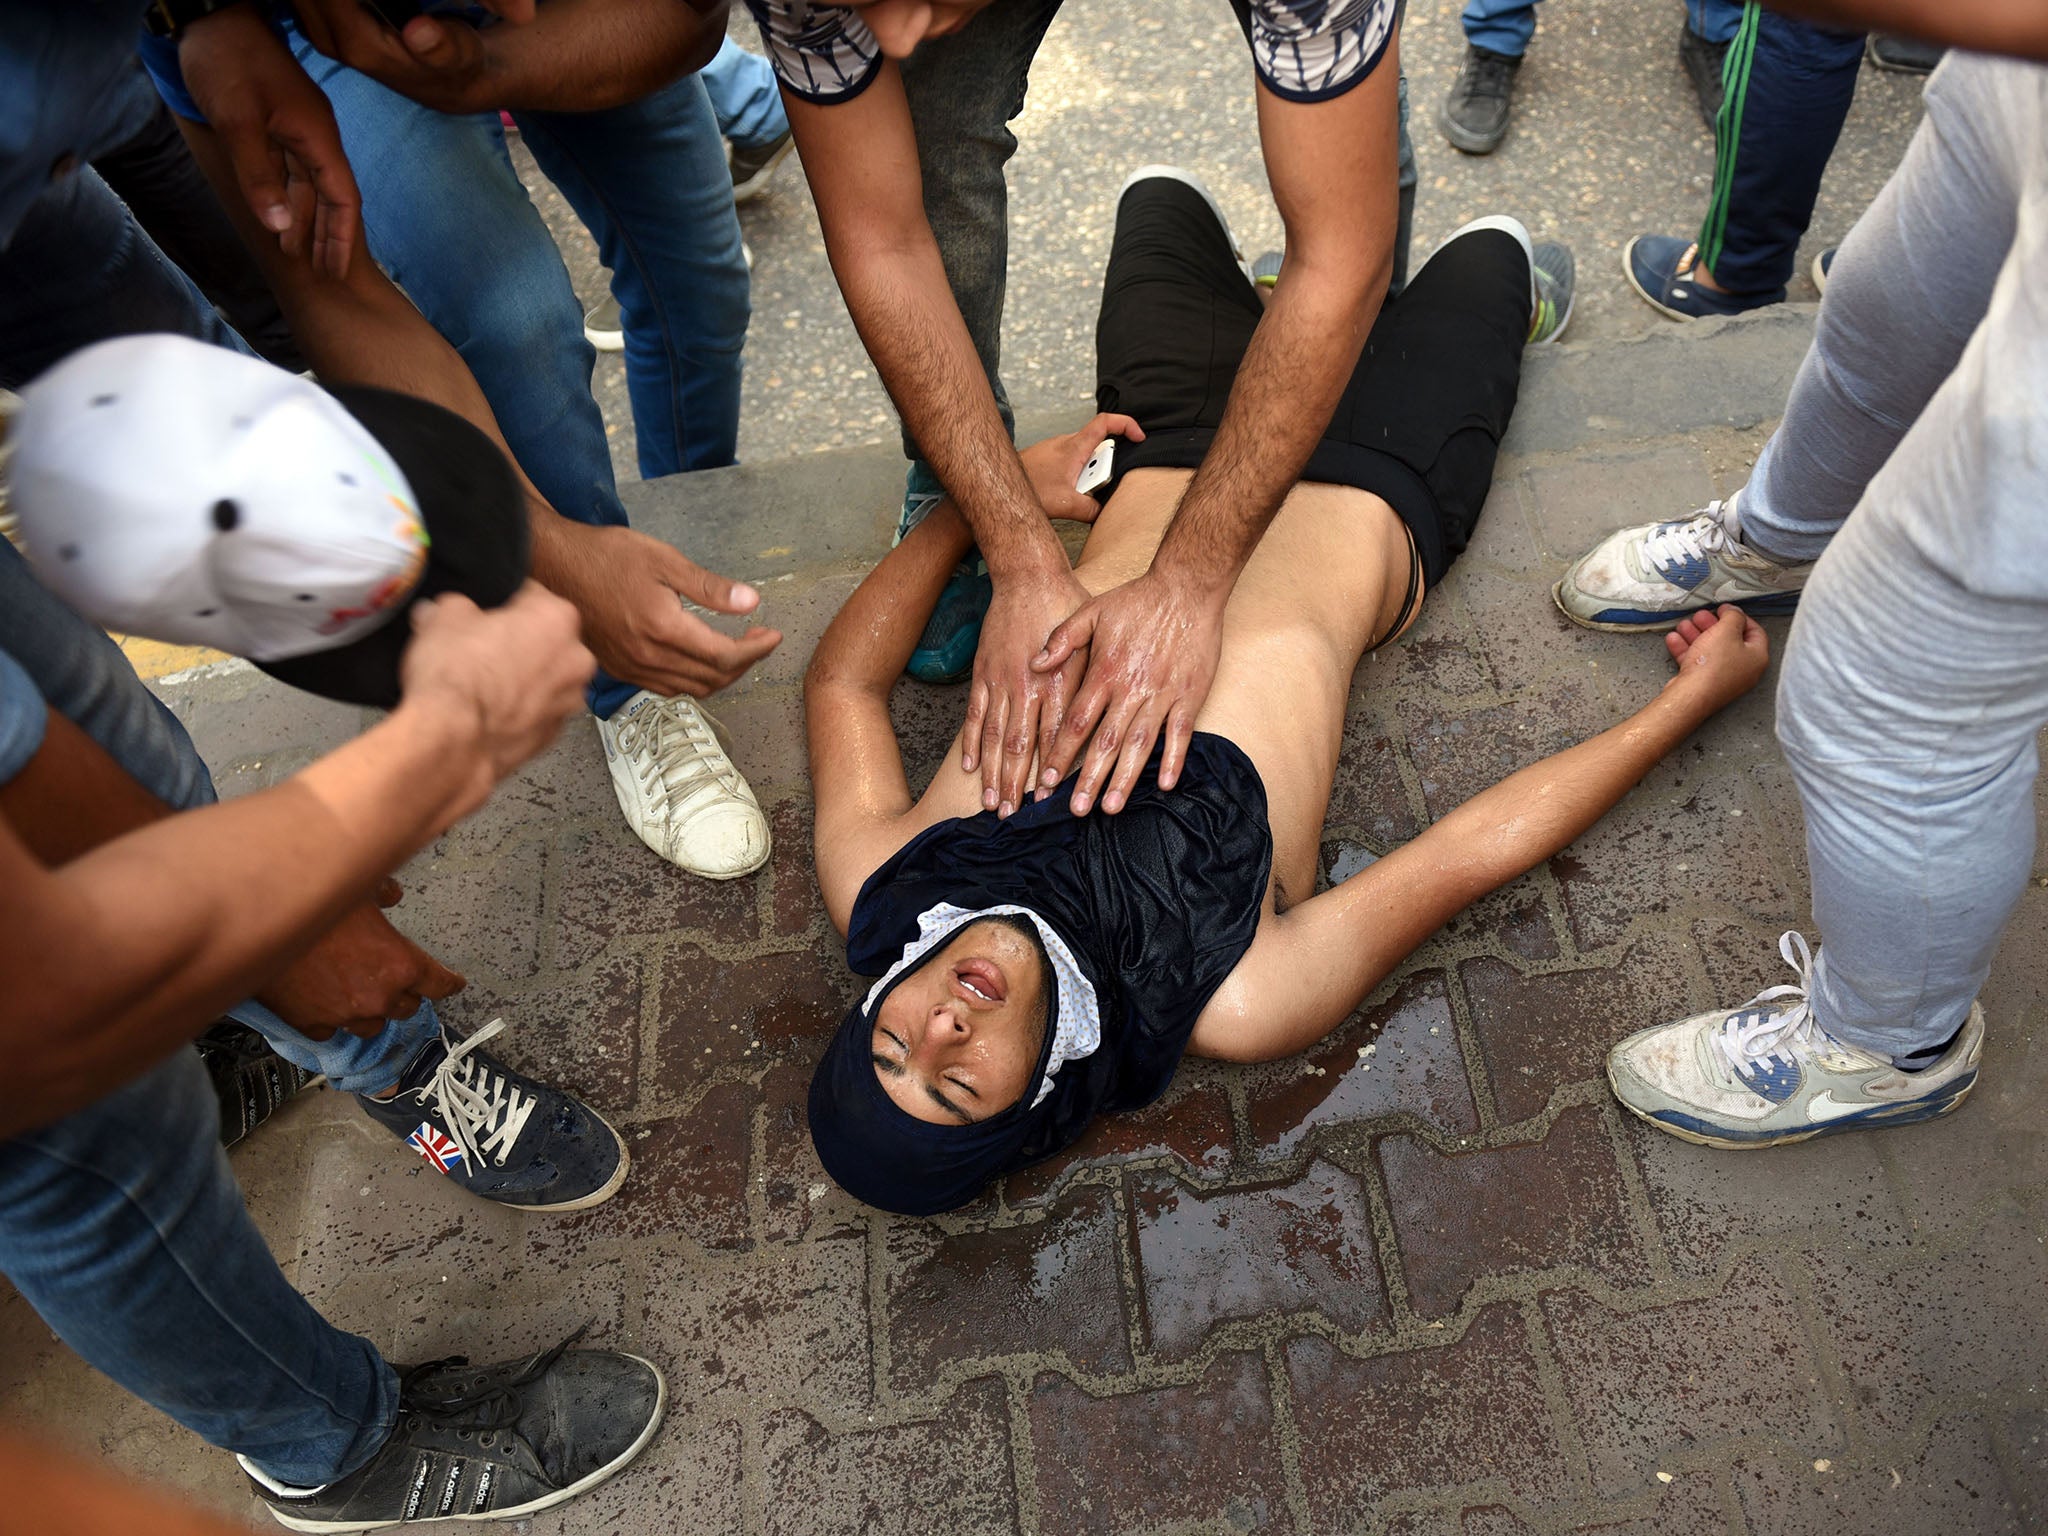 Egyptian police fired tear gas at protesters who held a rally calling for the 'downfall' of the regime